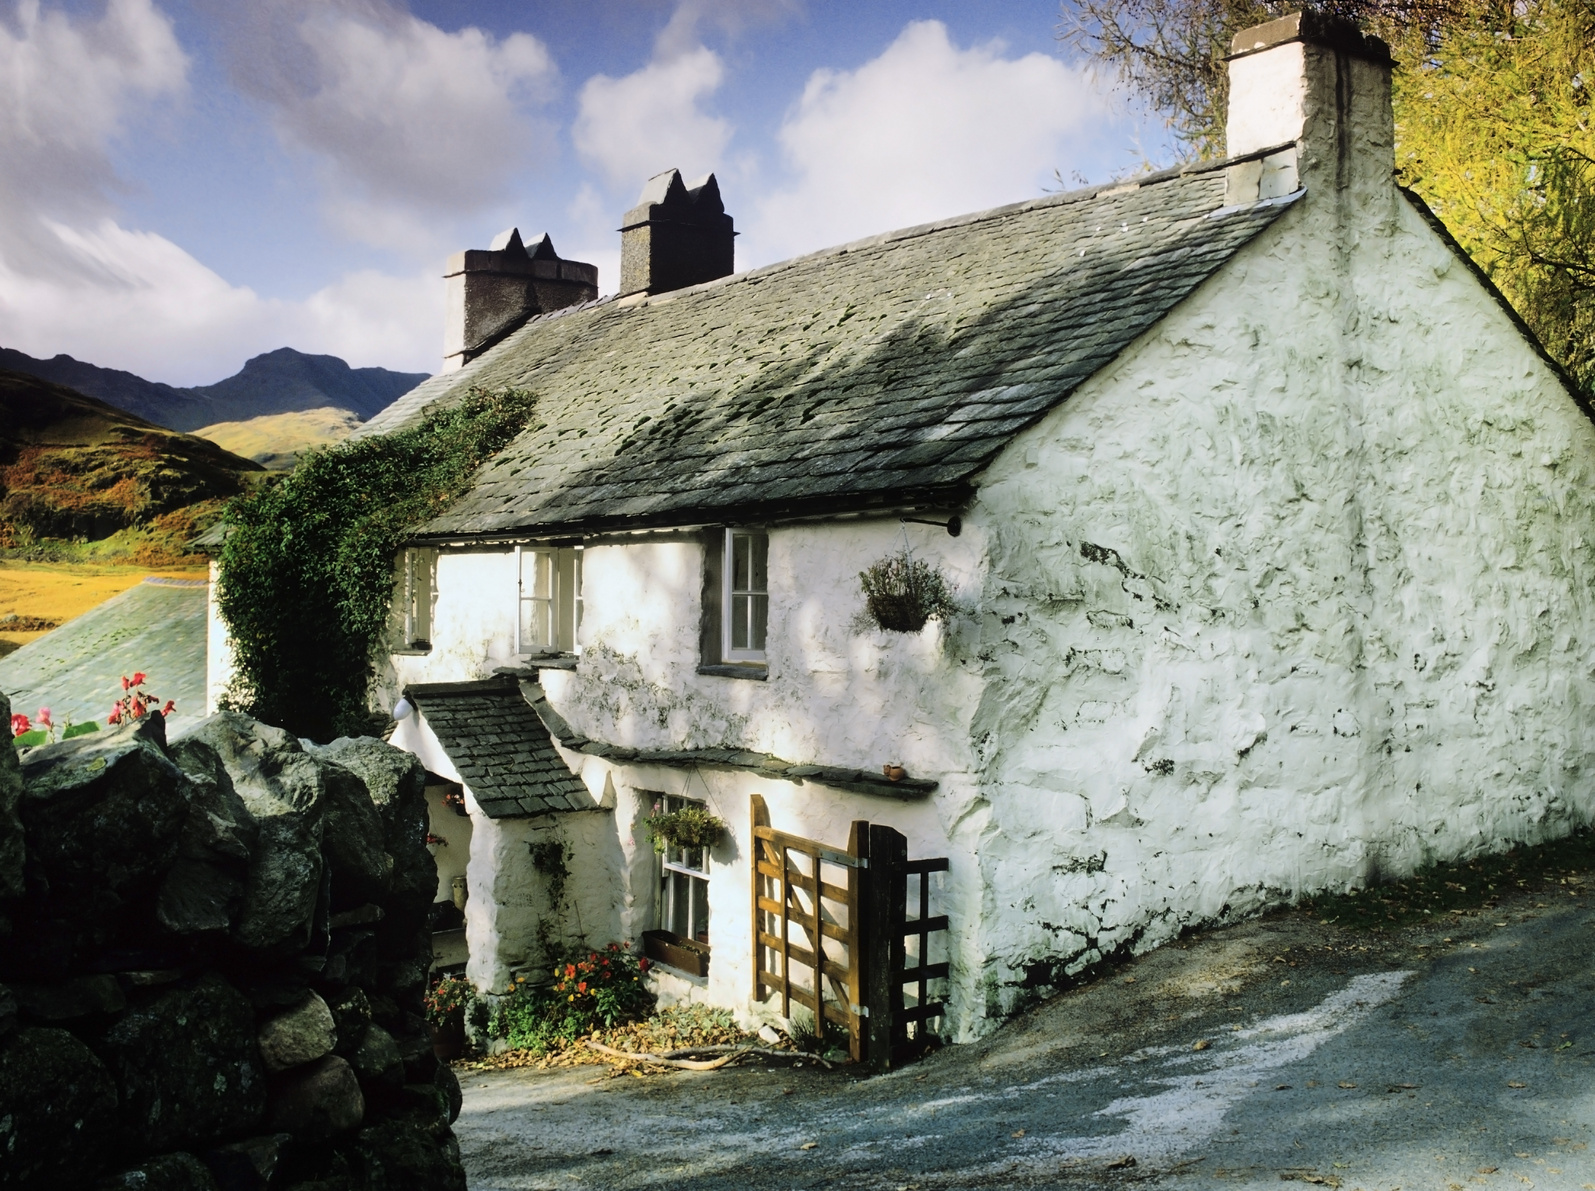 Cottage For Sale Cumbria Buysellanyproperty Com